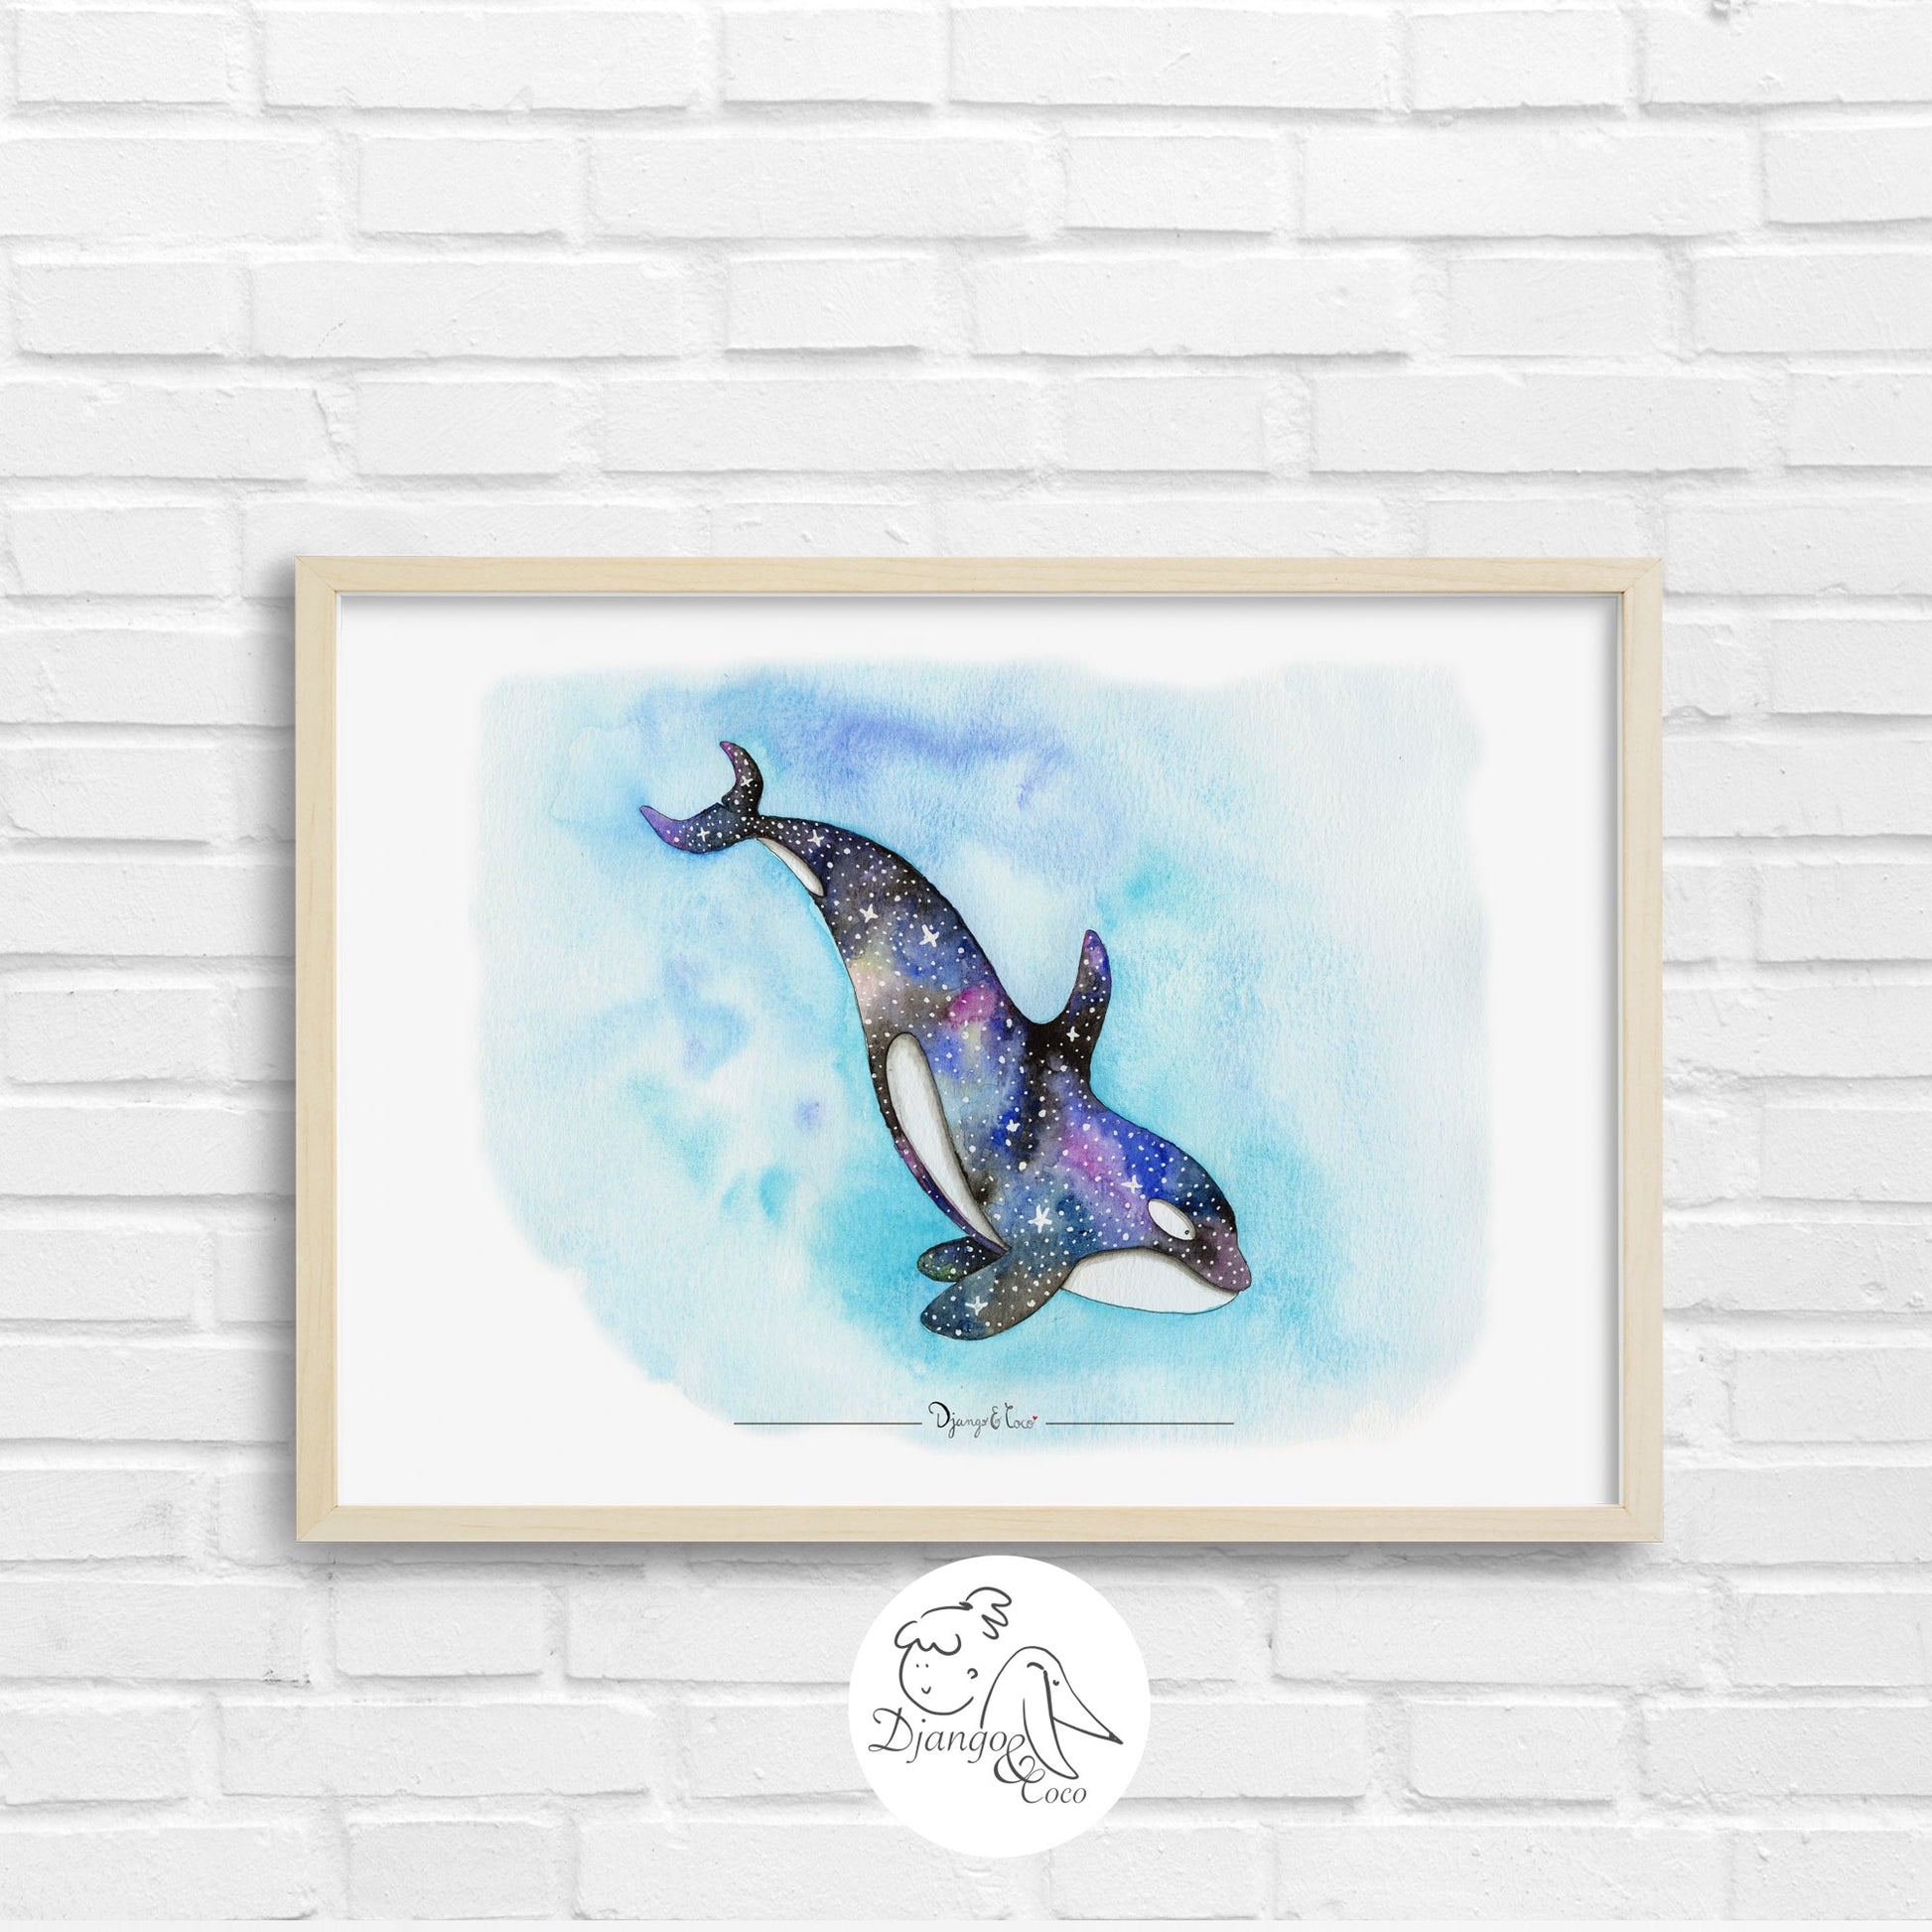 Space orca wall art on a wall